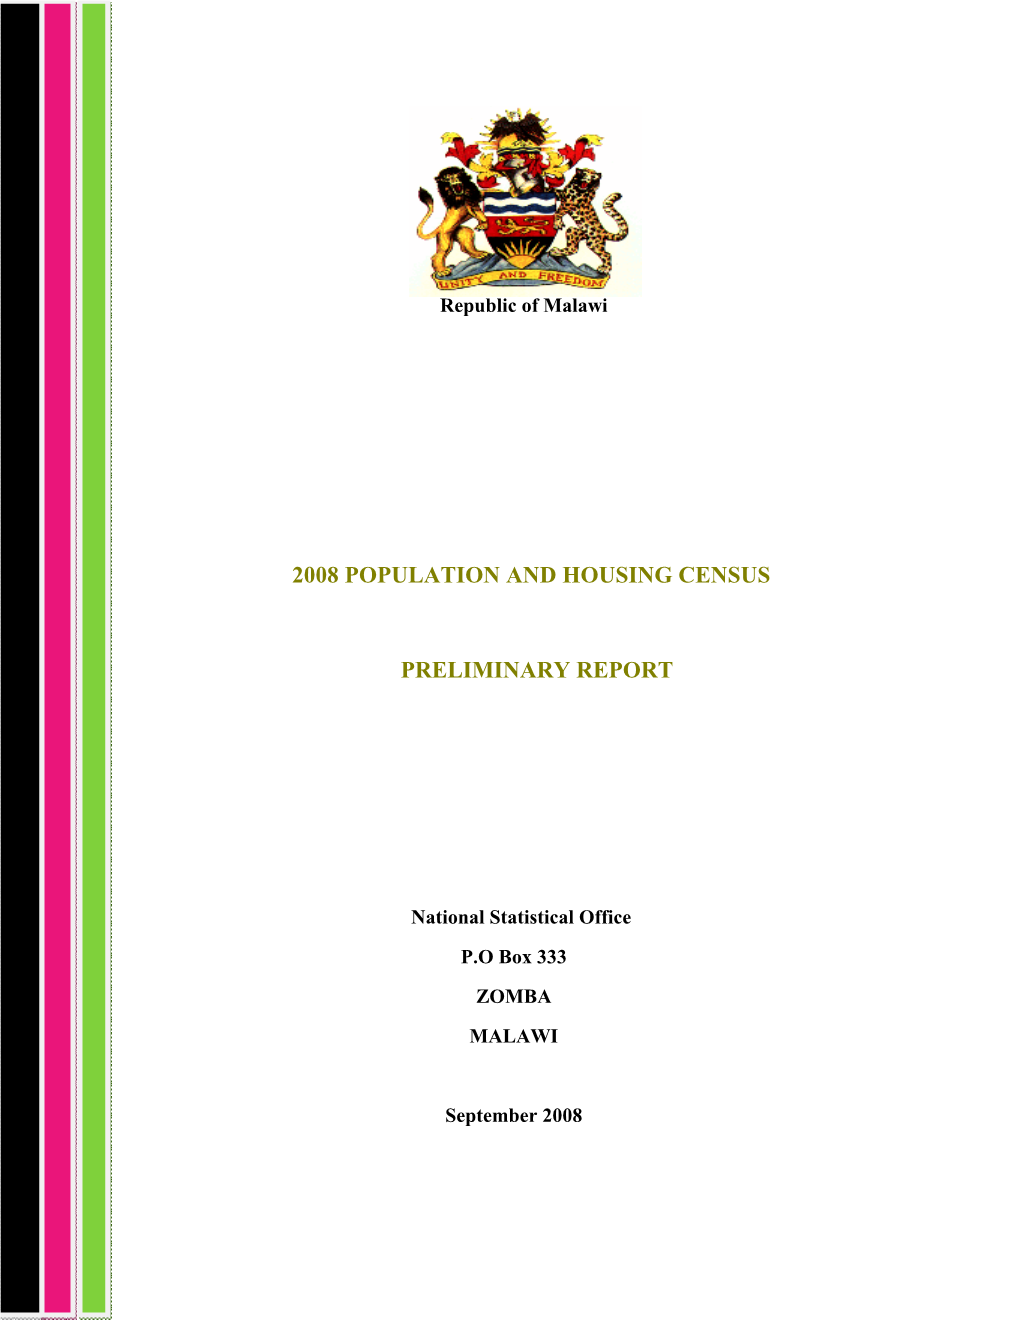 2008 Population and Housing Census Preliminary Report